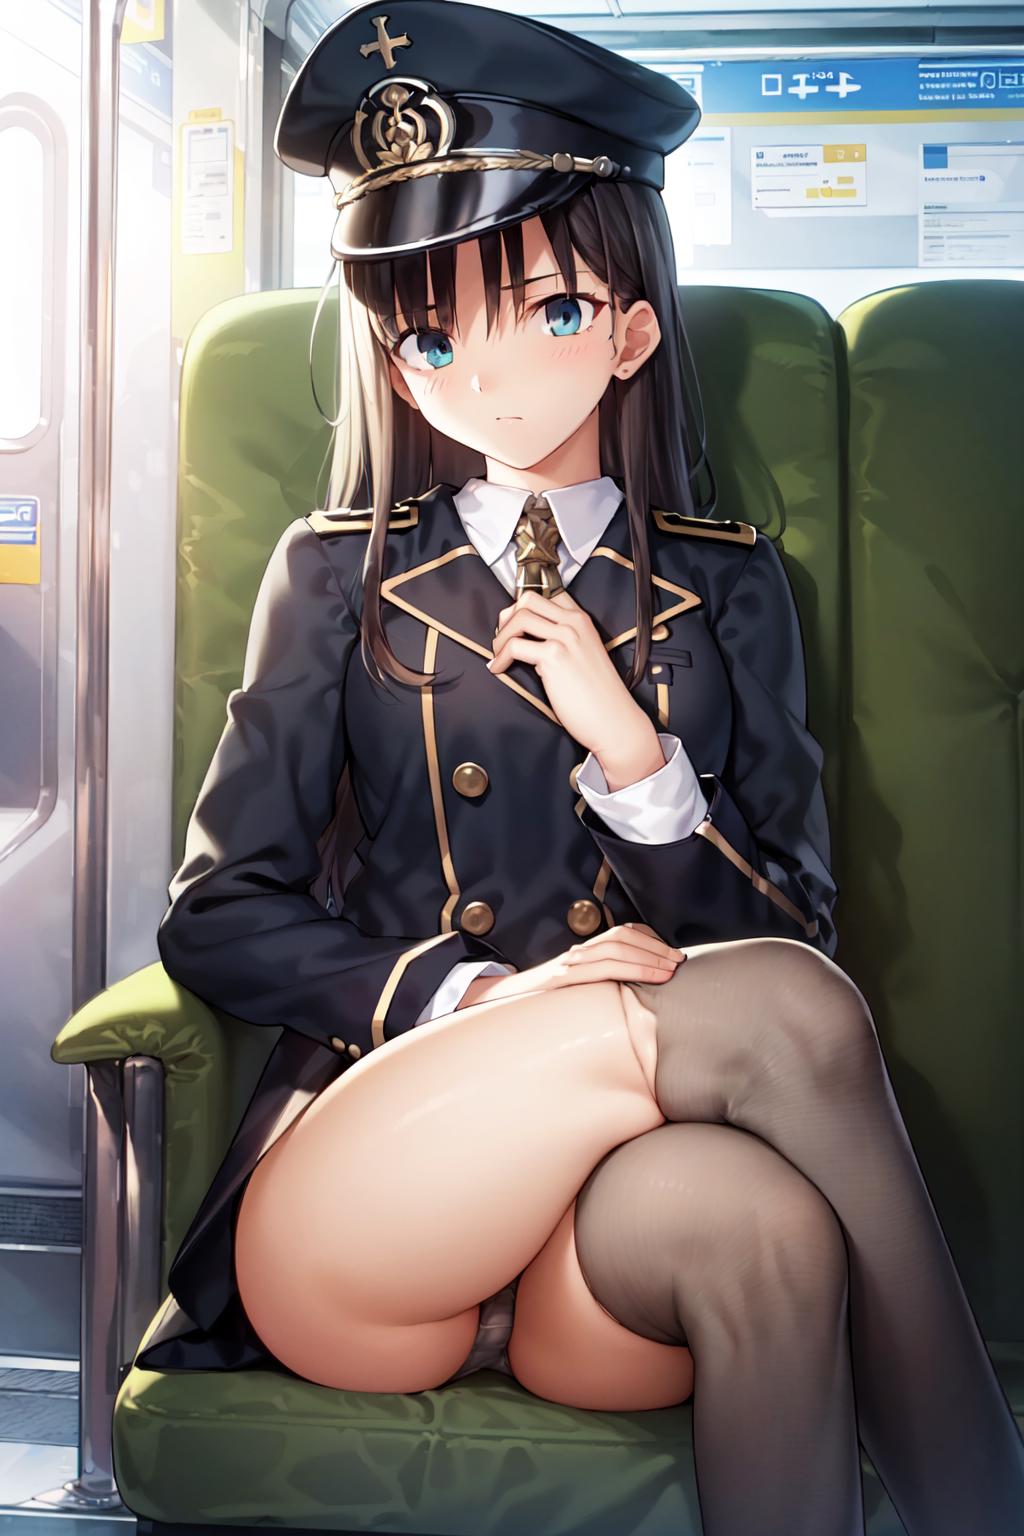 Fate/Stay Night VN style image by Cooler_Rider